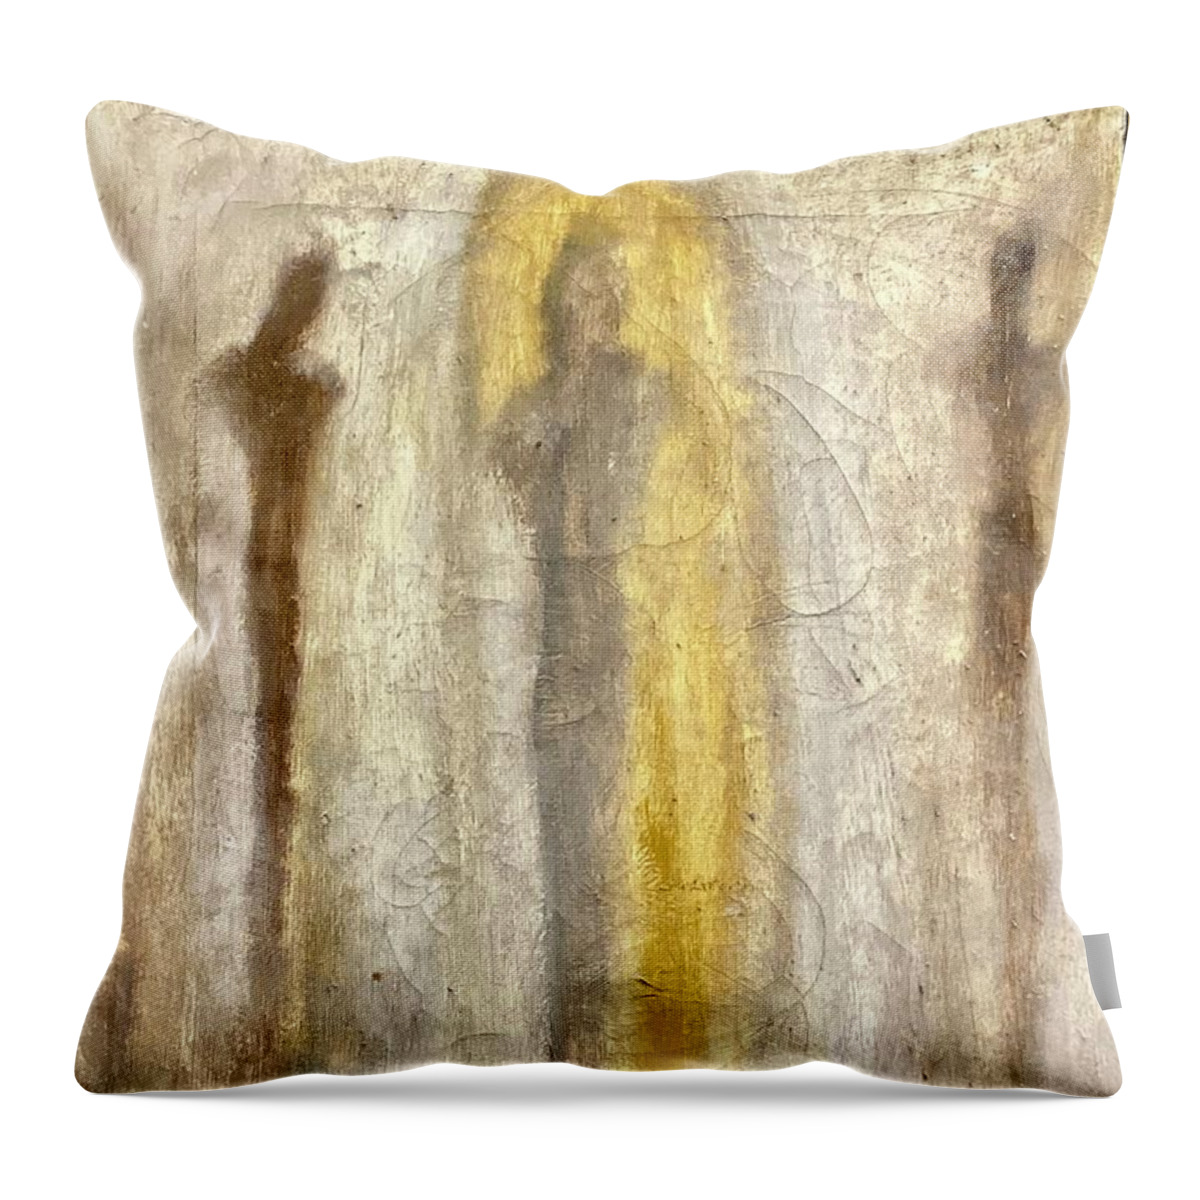 Silhouettes Throw Pillow featuring the painting Three Silhouettes by David Euler